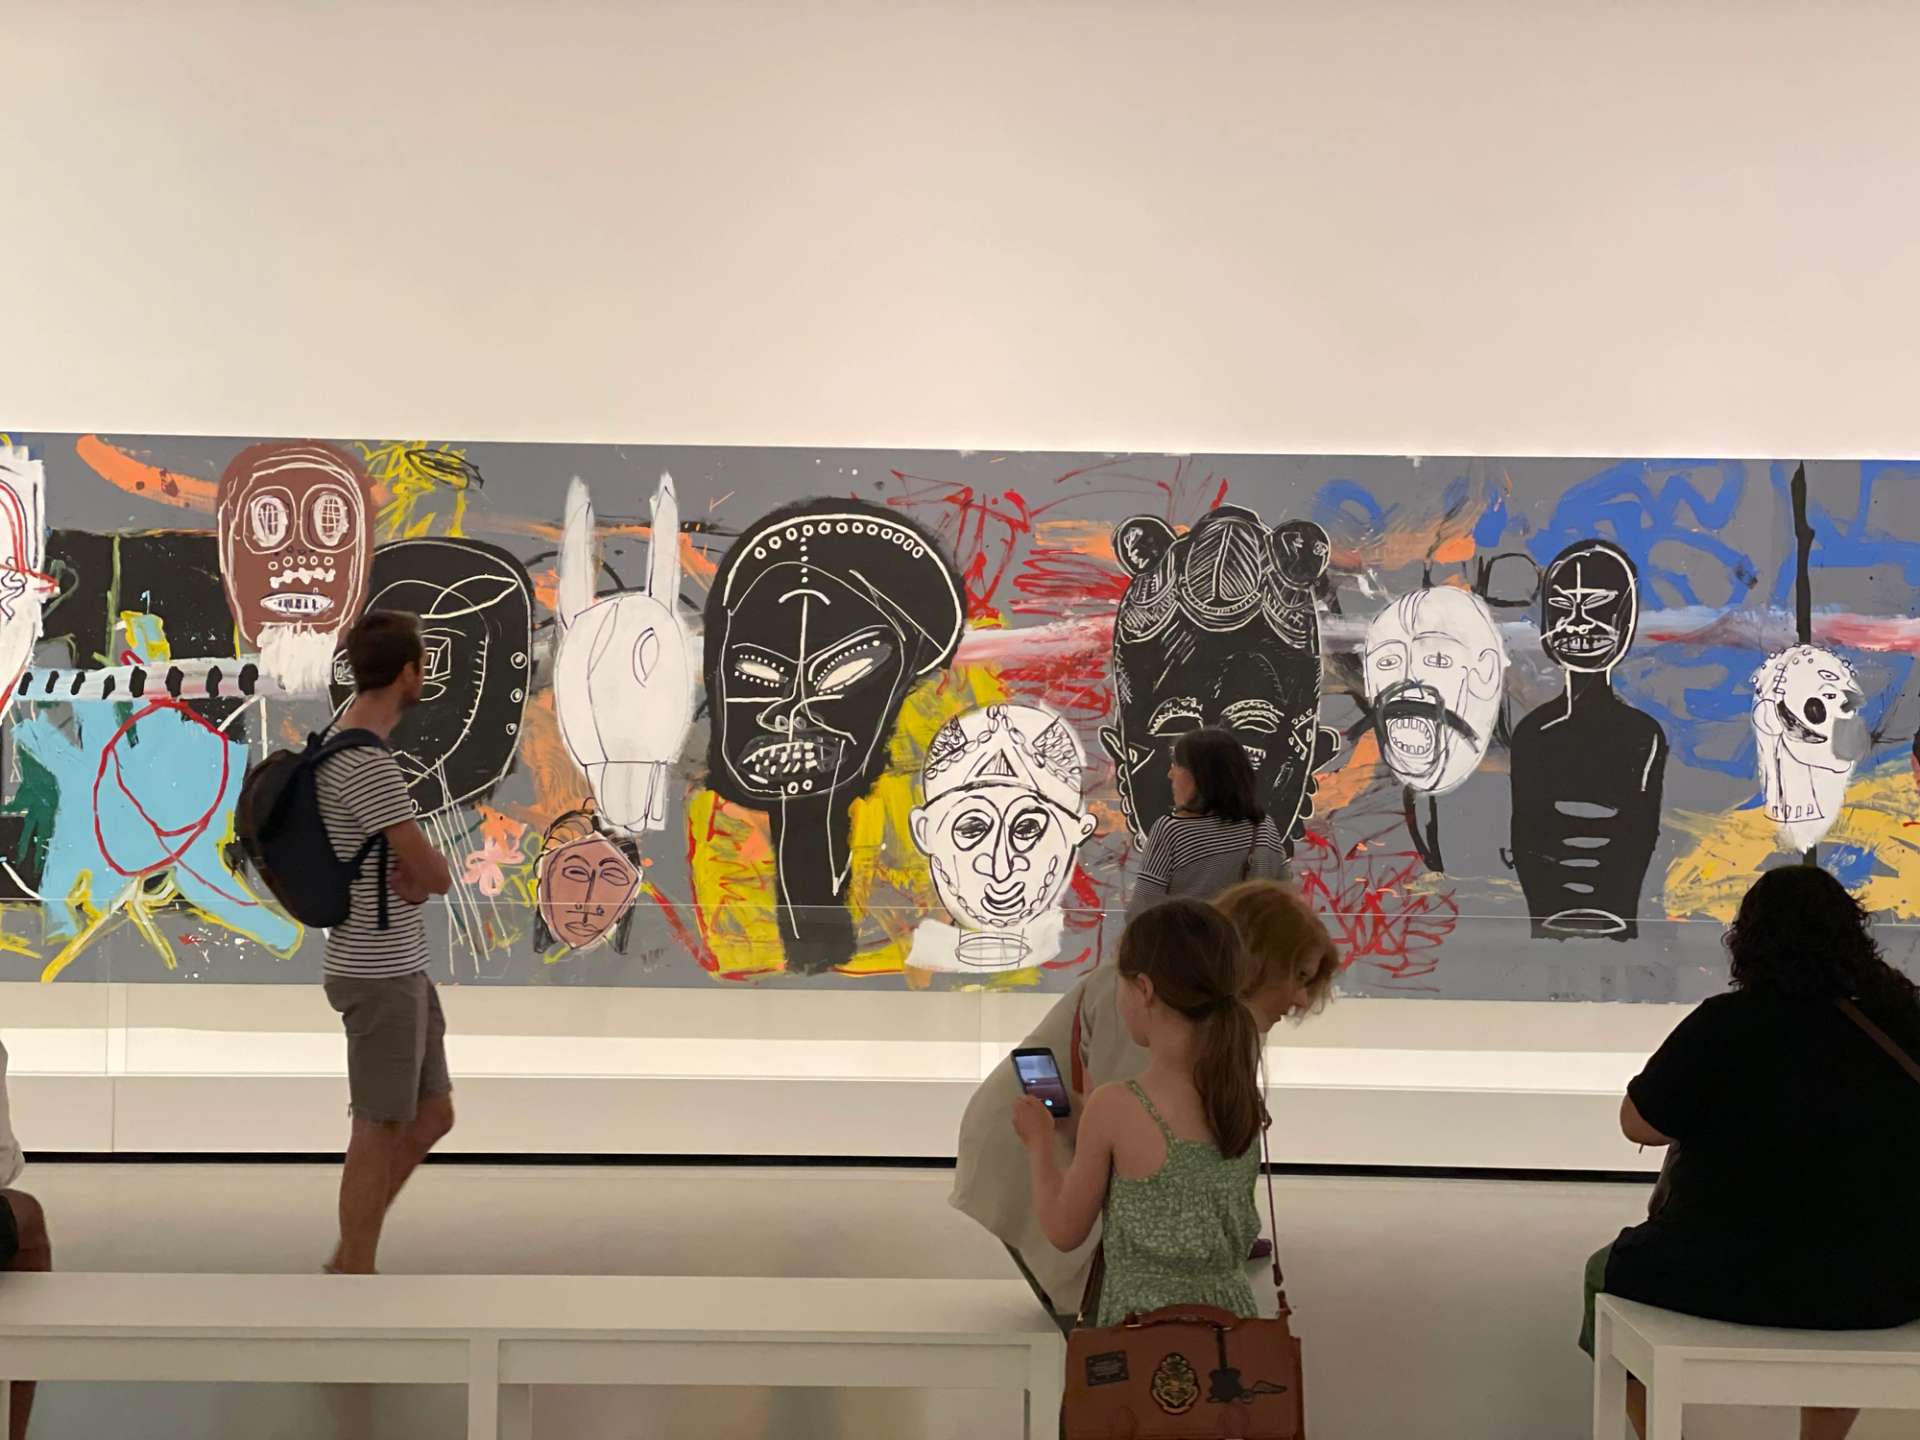 Basquiat x Warhol. Painting Four Hands” exhibition at the